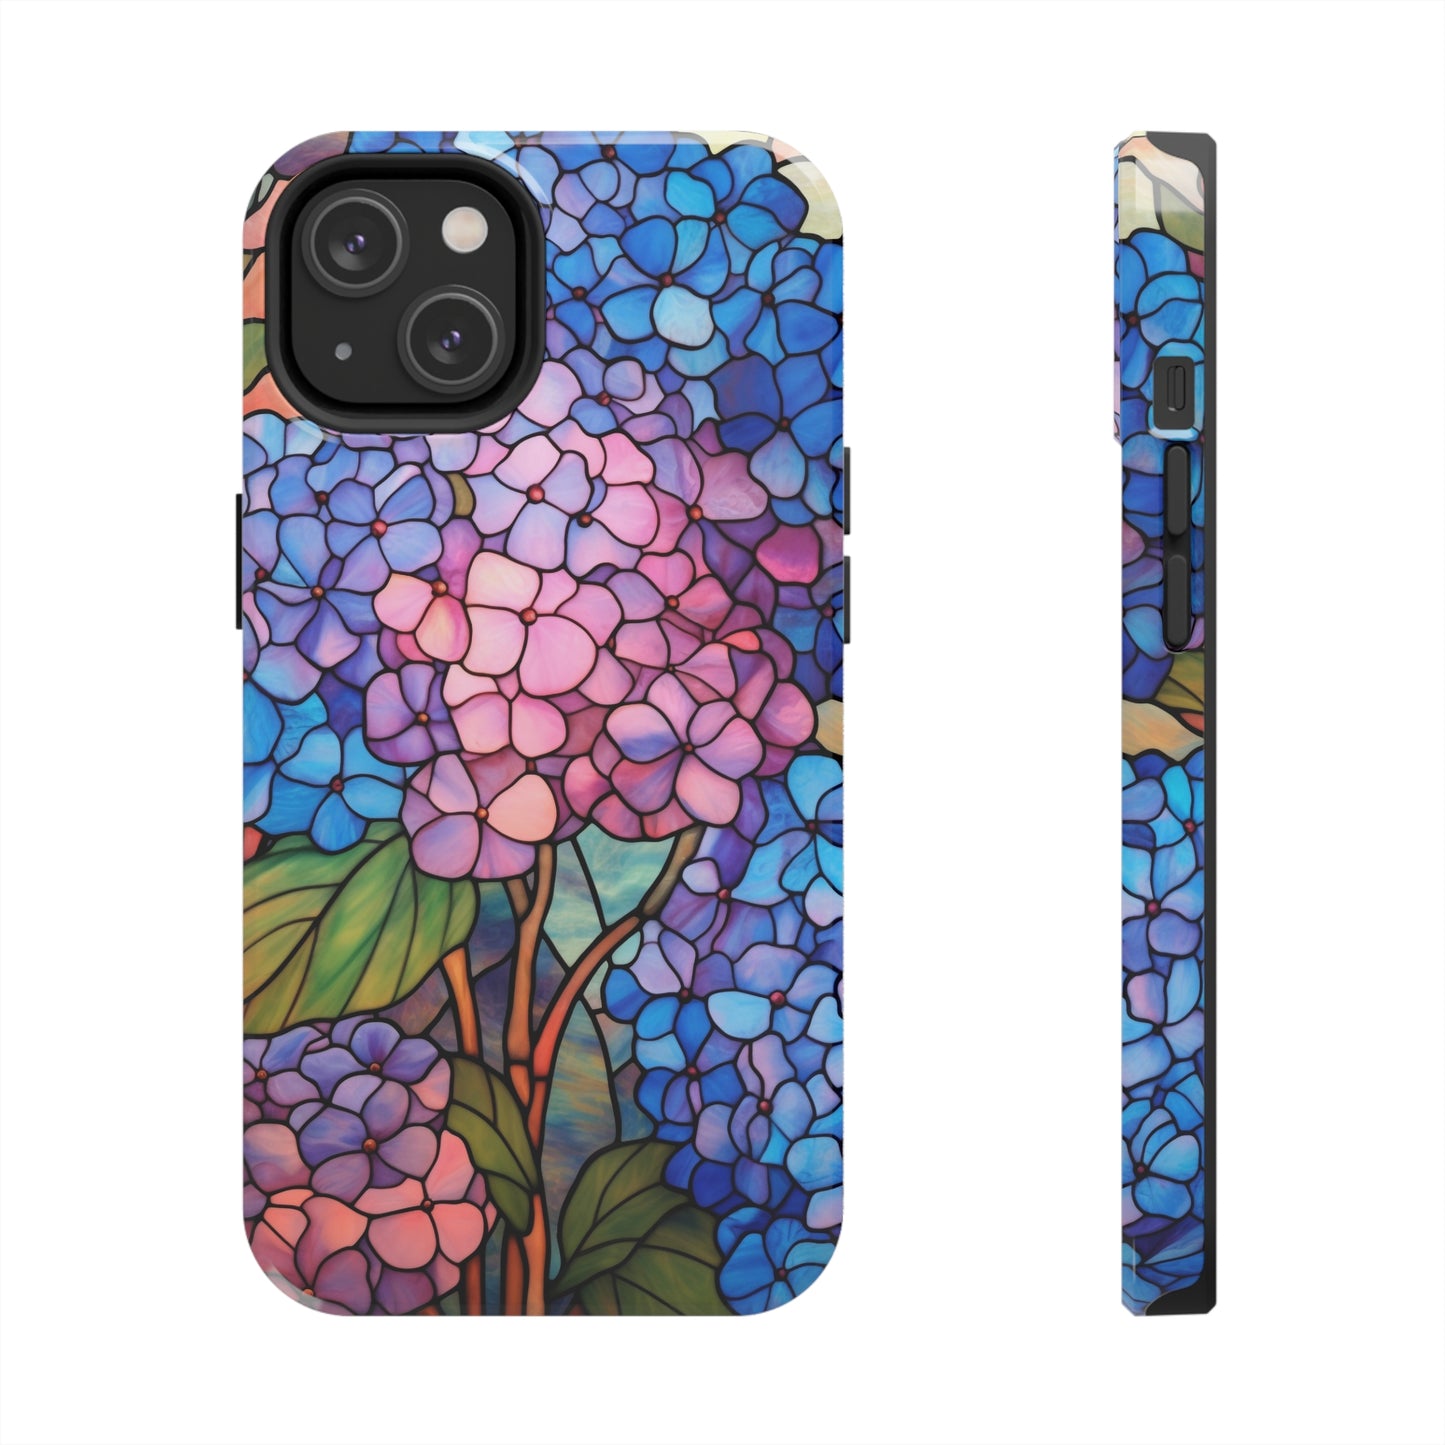 Classic stained glass and flower motif on iPhone 13 Pro Max Case